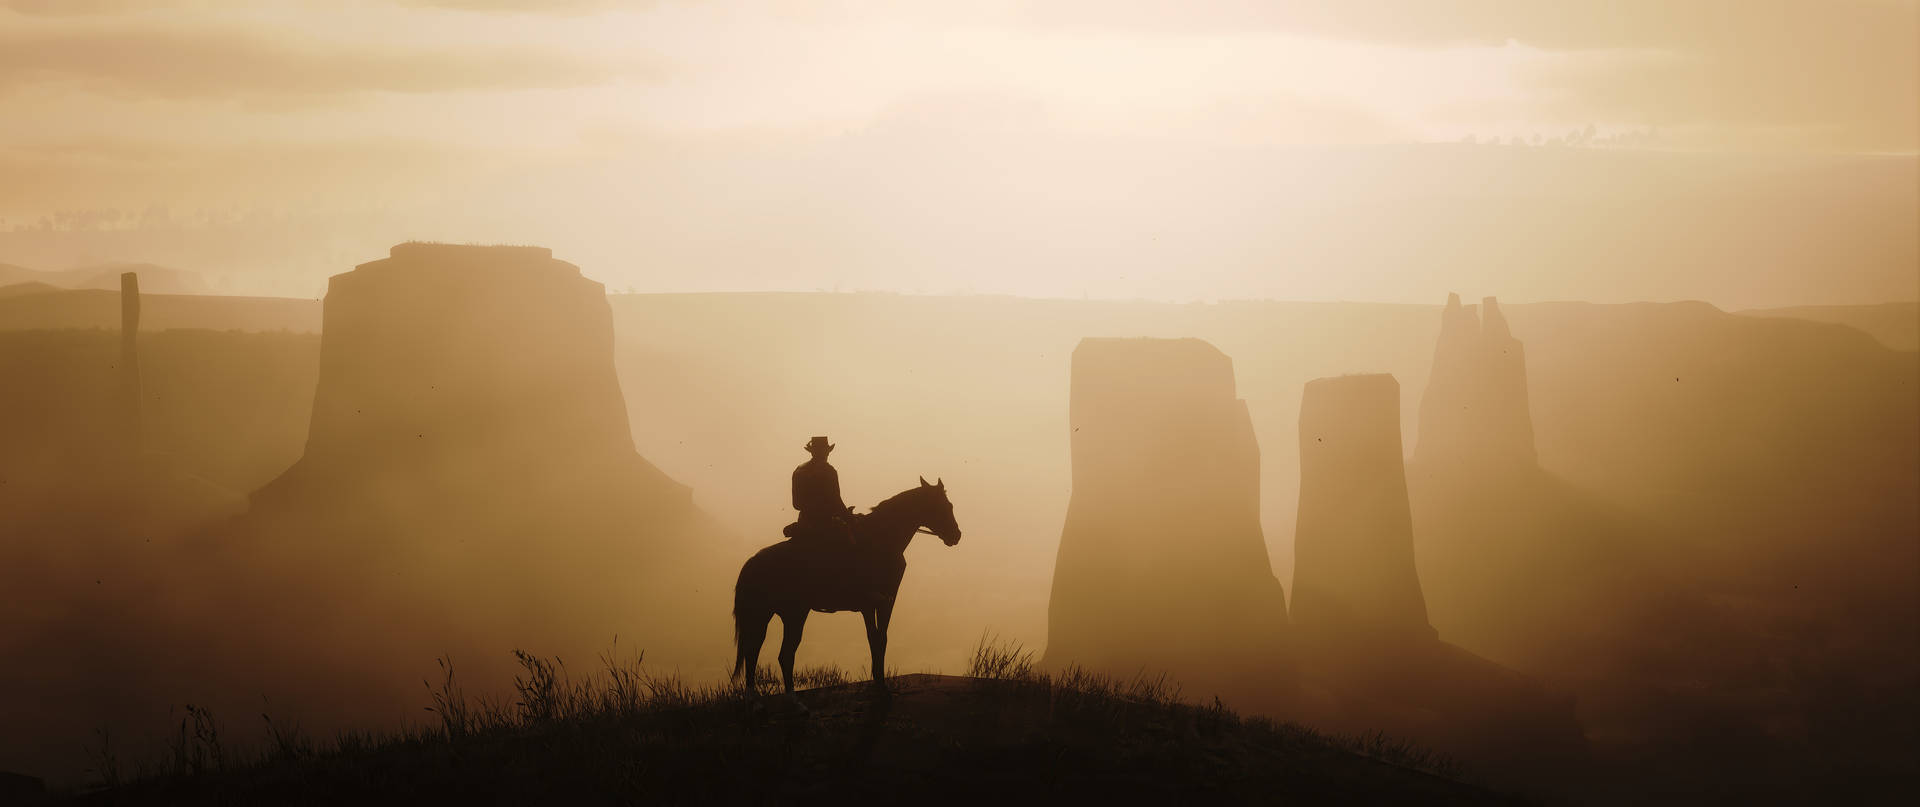 a man on a horse is standing on a hill Wallpaper